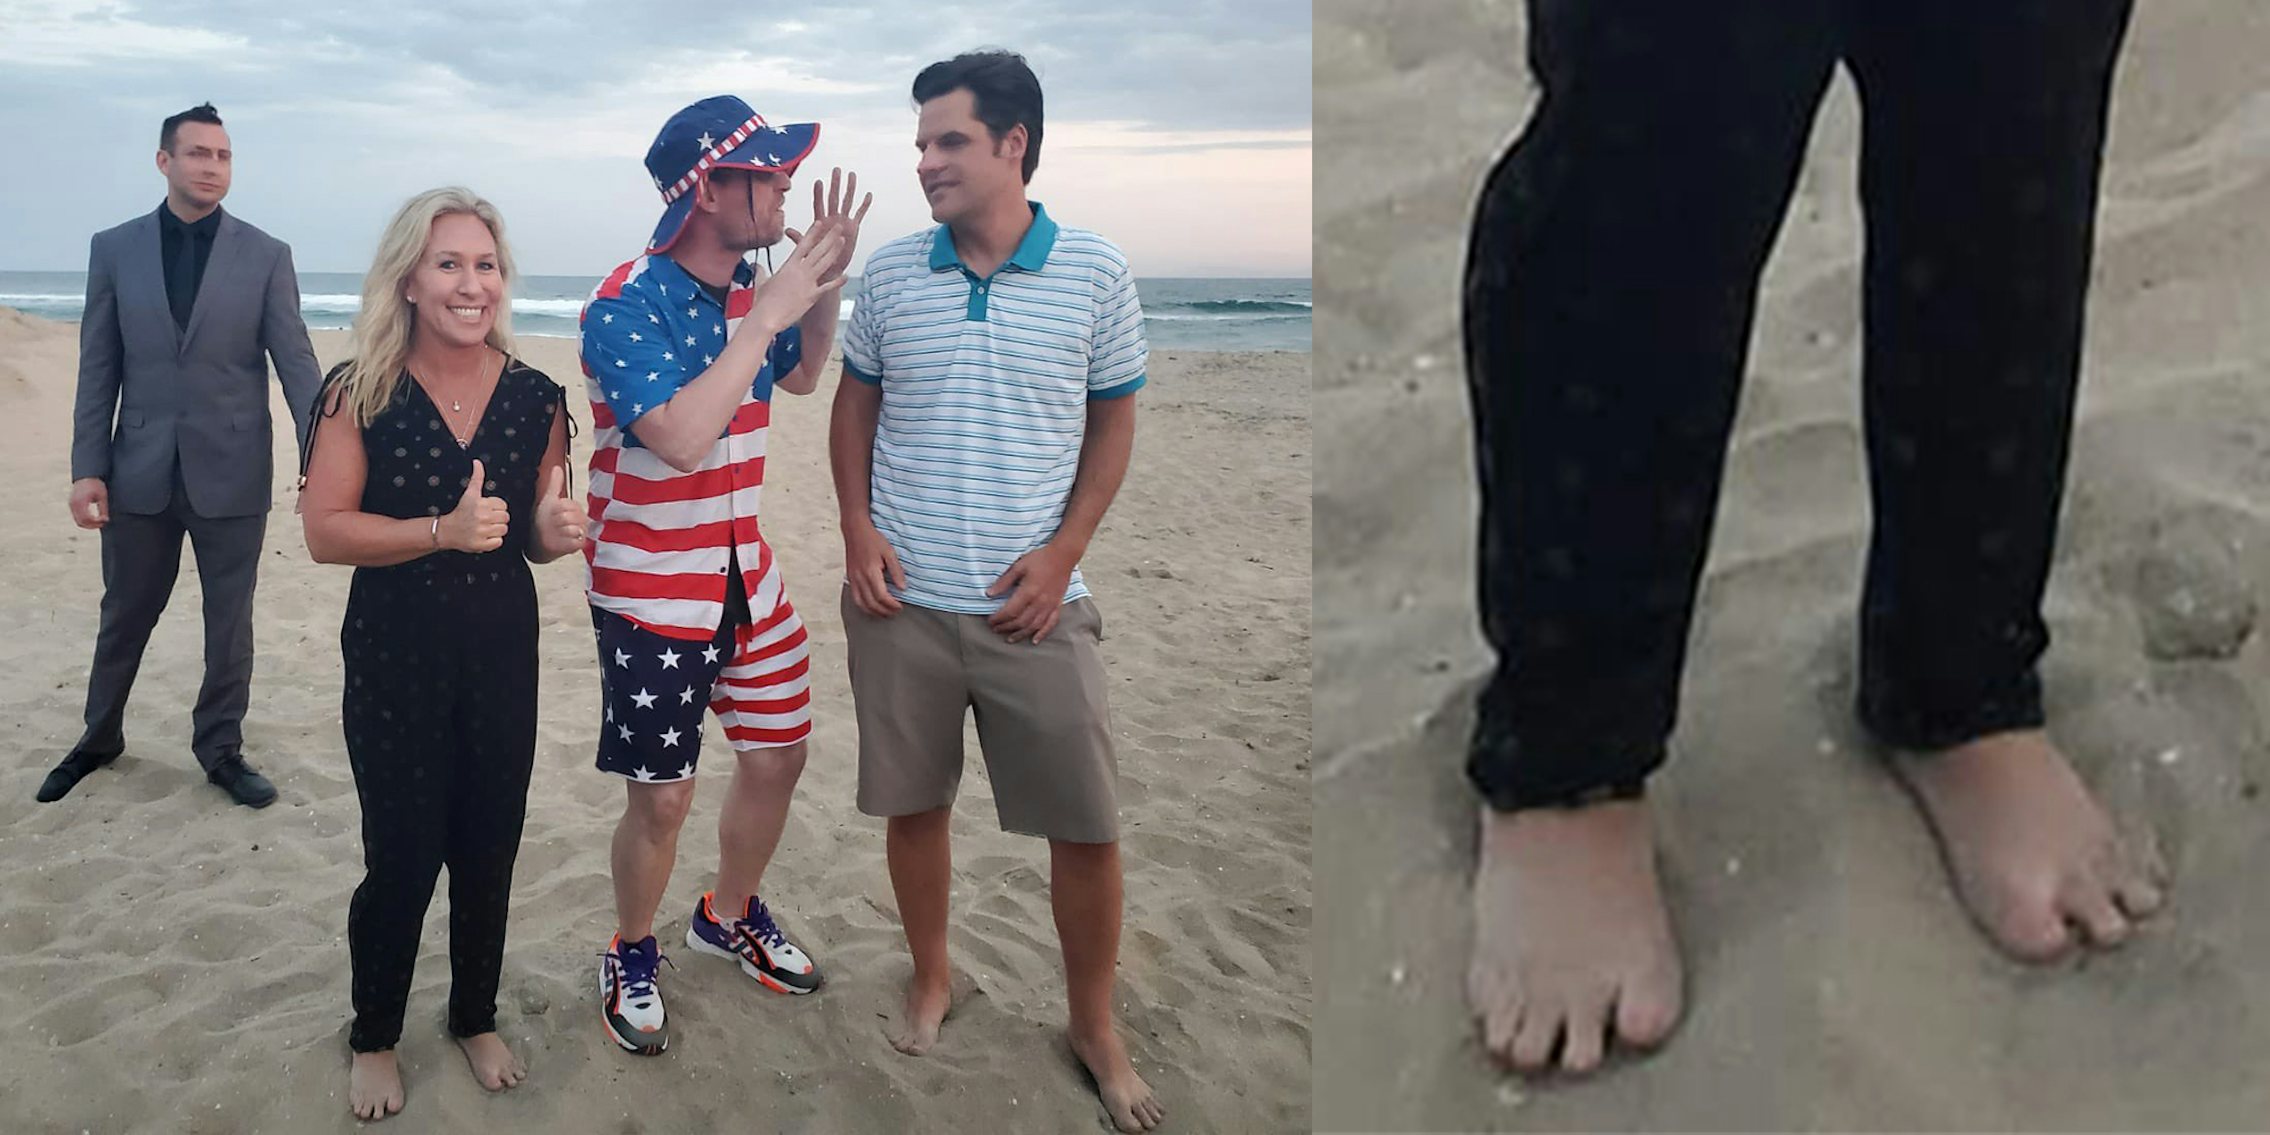 Marjorie Taylor Greene with Matt Gaetz and two other men on a beach (L) Feet in sand (R)